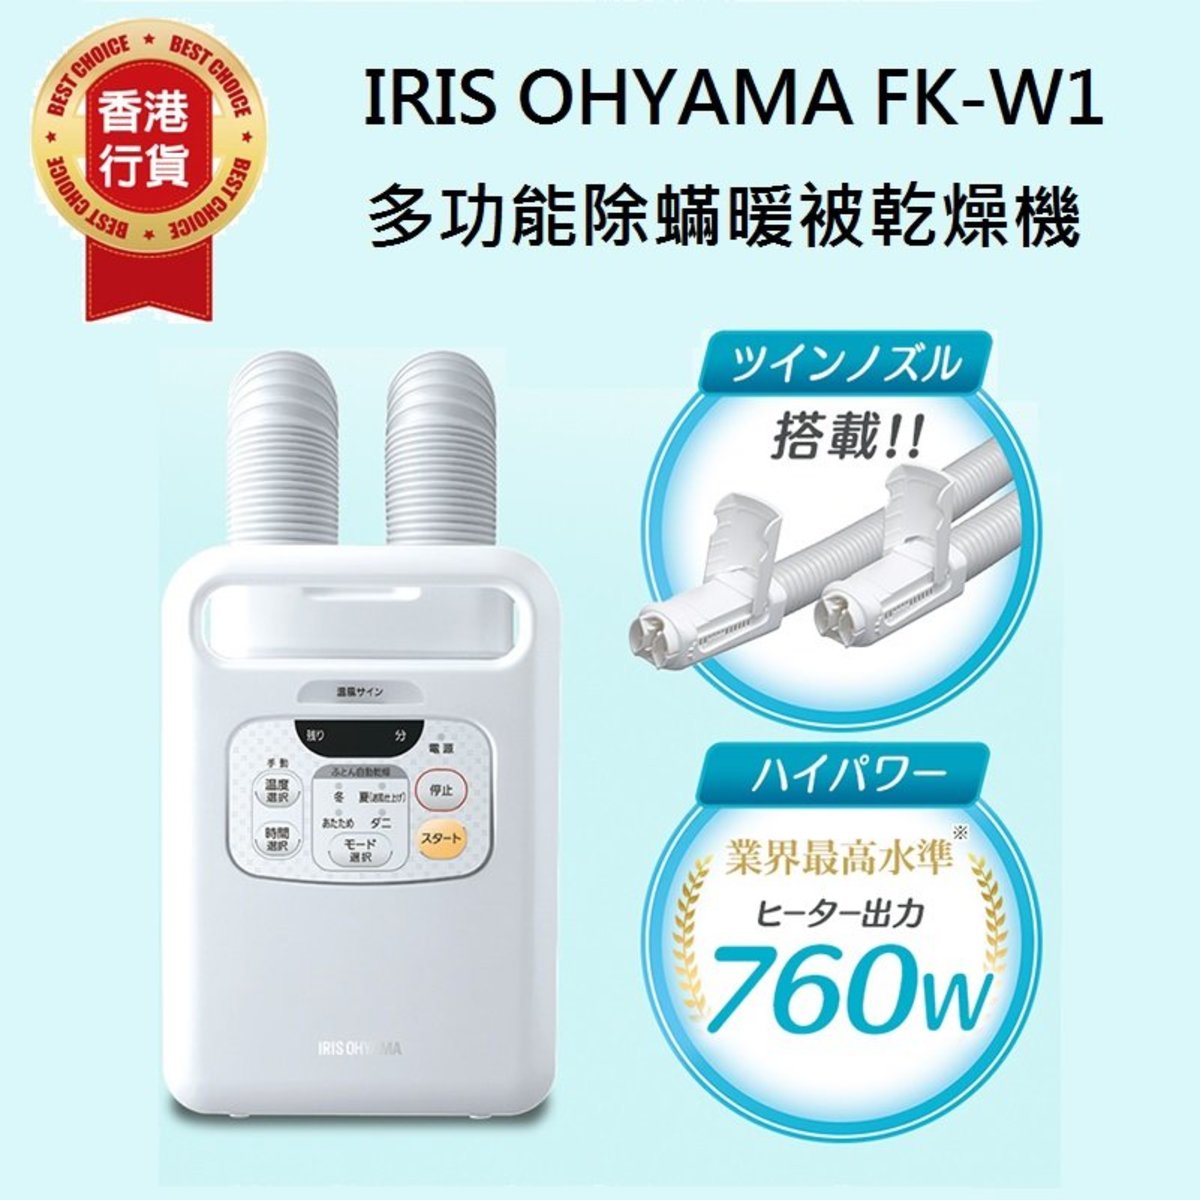 IRIS - FK-W1 Double-tube air outlet multi-functional mite removal warm quilt dryer [Hong Kong licensed]